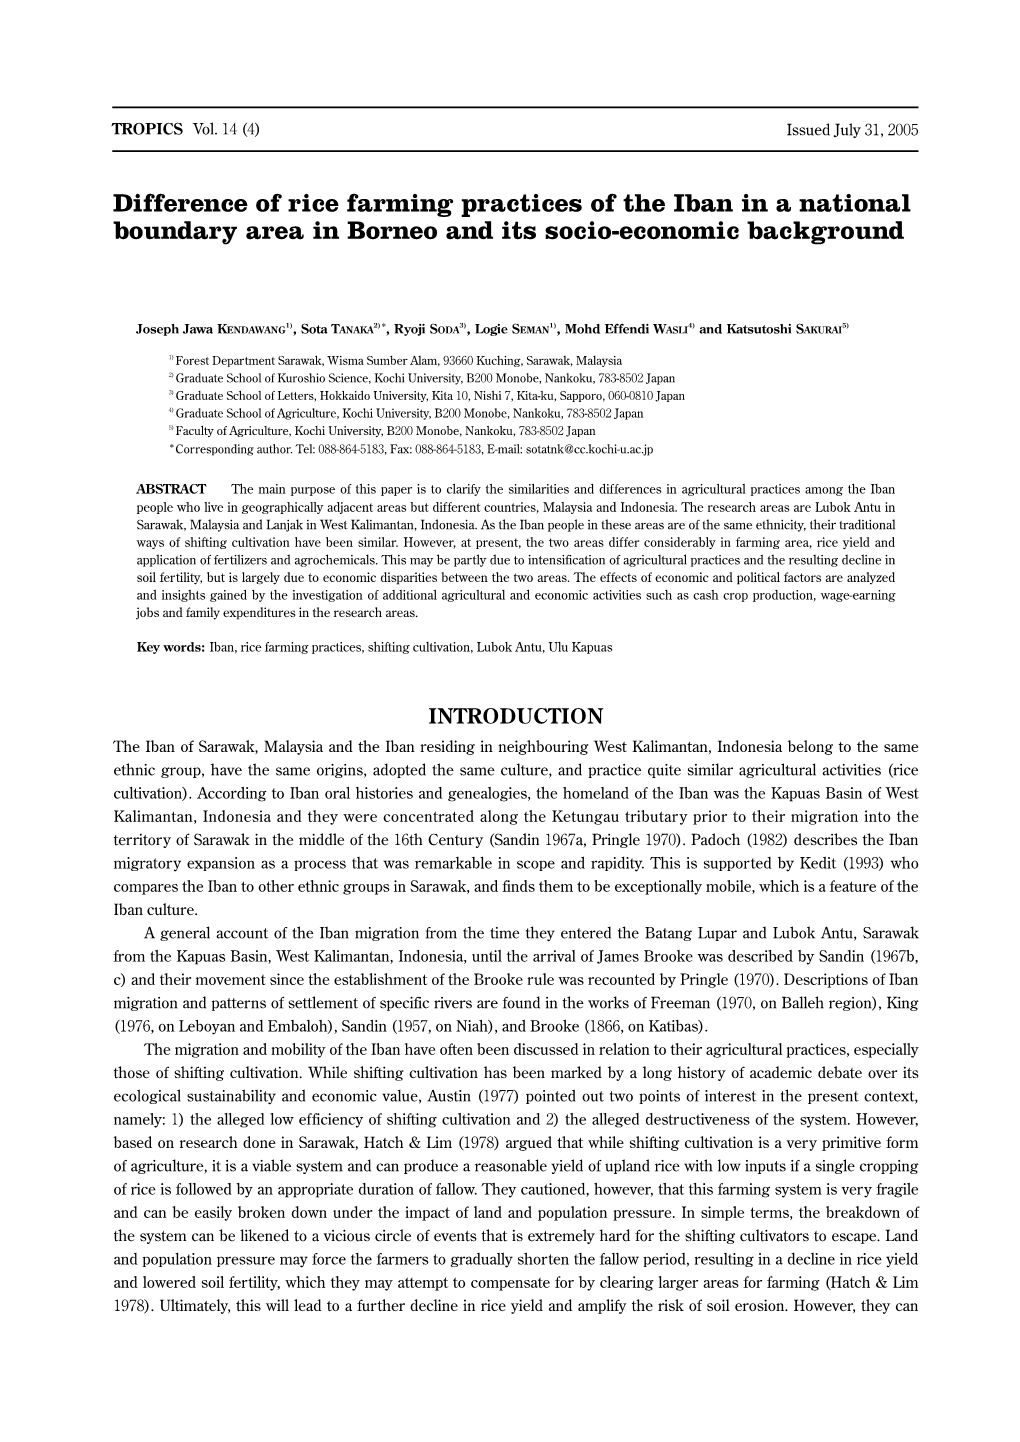 Difference of Rice Farming Practices of the Iban in a National Boundary Area in Borneo and Its Socio-Economic Background